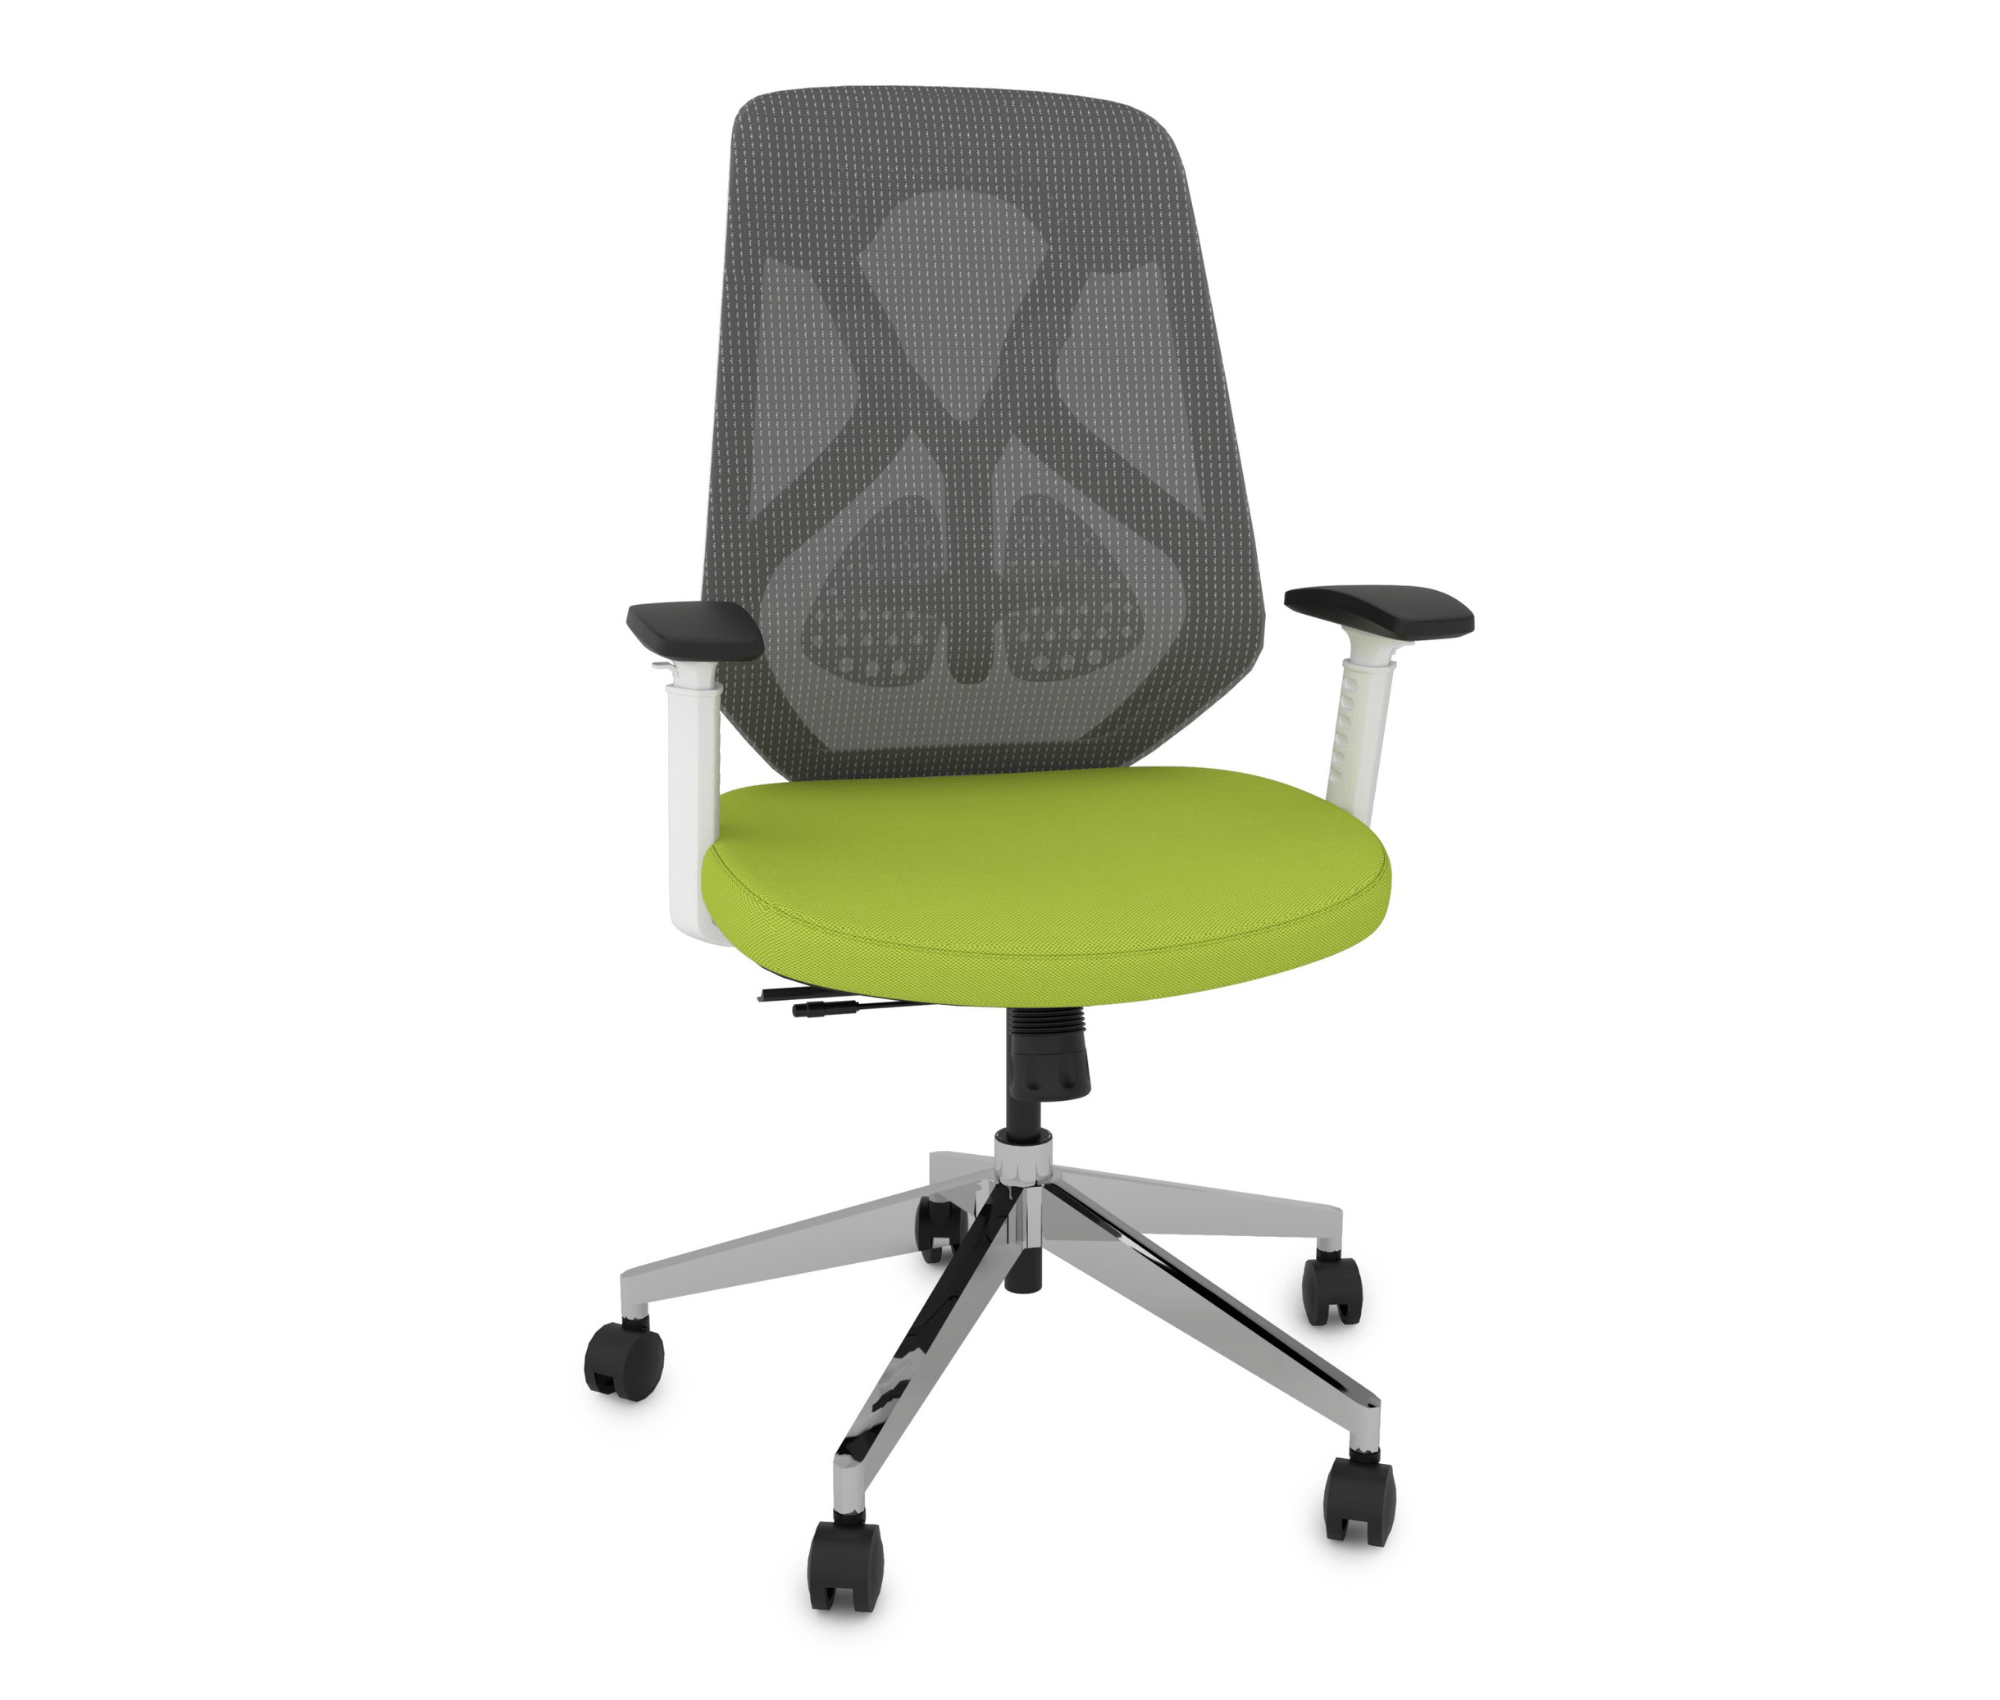 Ergonomic Plus Chair | Posture-Correcting Office Chair Porvata Office Chairs Lime